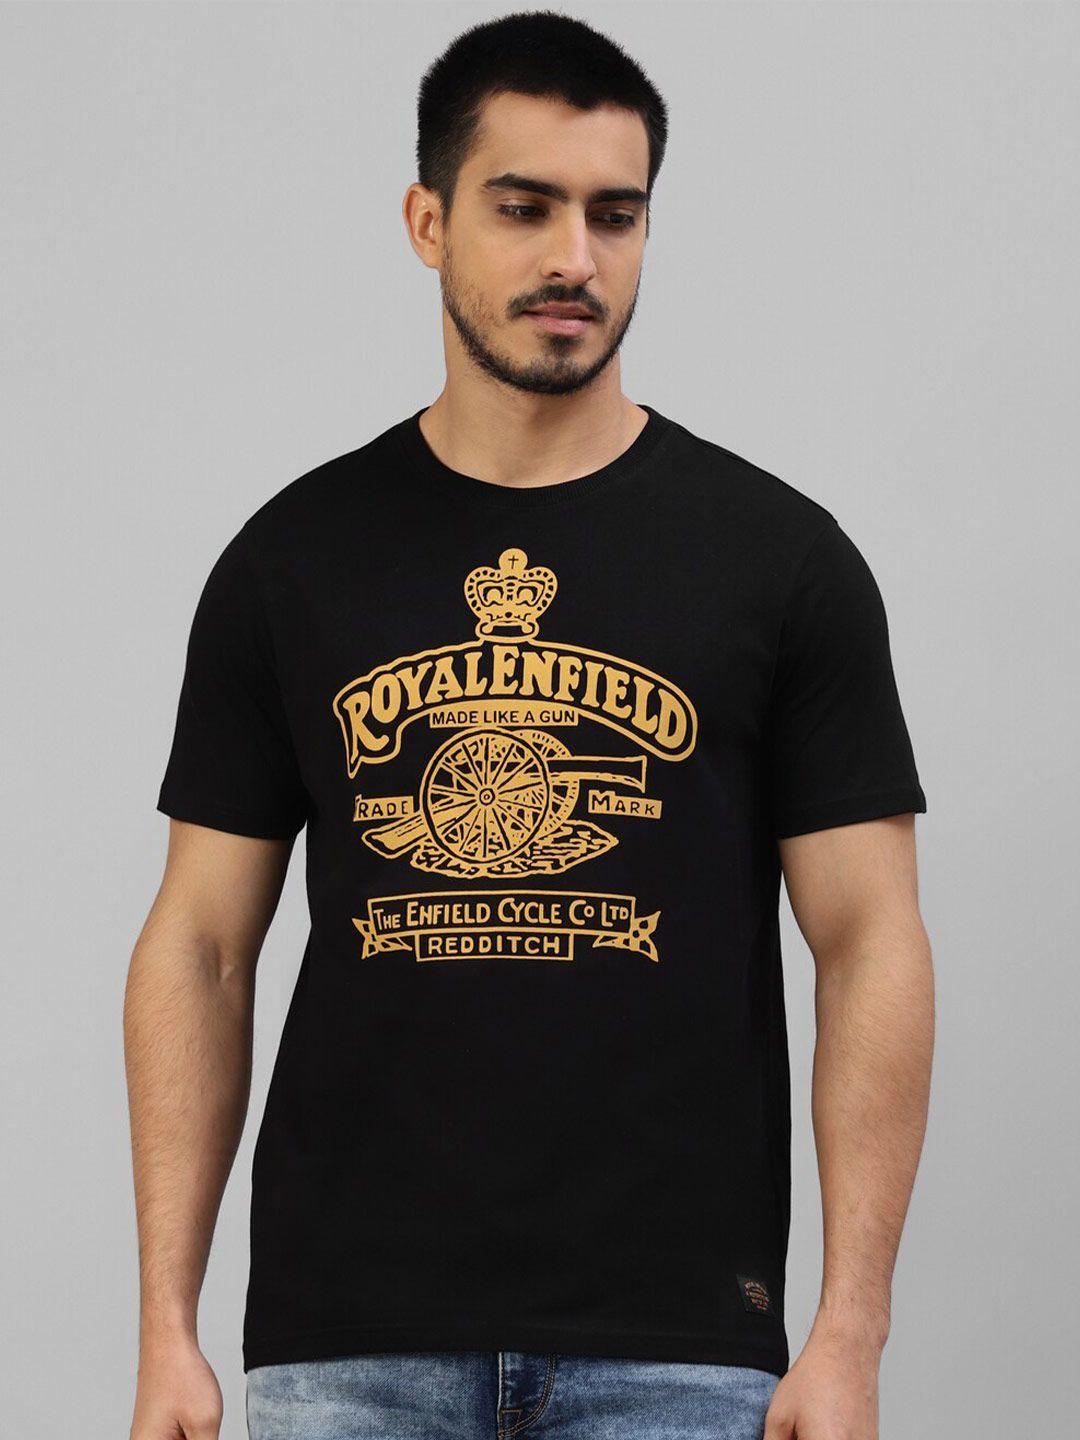 royal enfield typography printed round neck regular fit cotton t-shirt